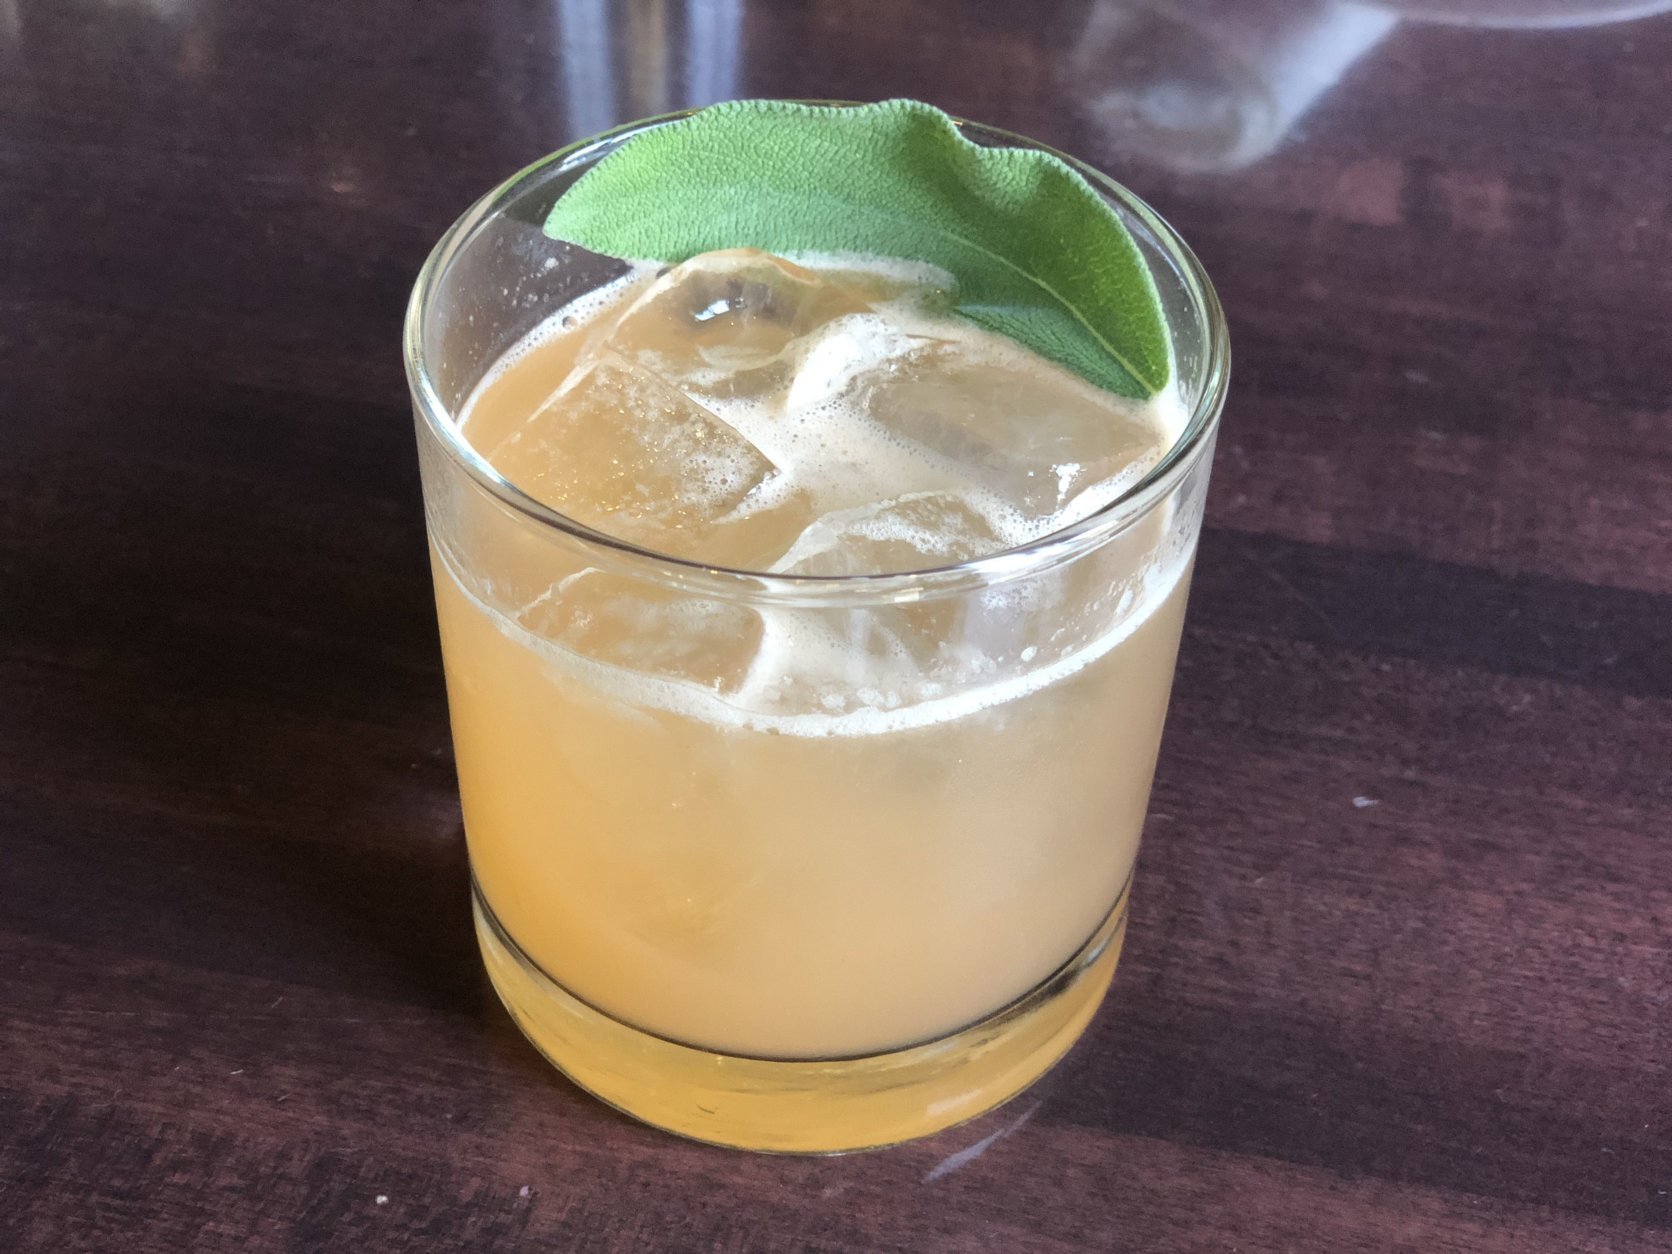 Packed with spicy, earthy, sweet and refreshing flavors, this cocktail compliments the bird, the pie, and all the sides served in between. (WTOP/Rachel Nania) 